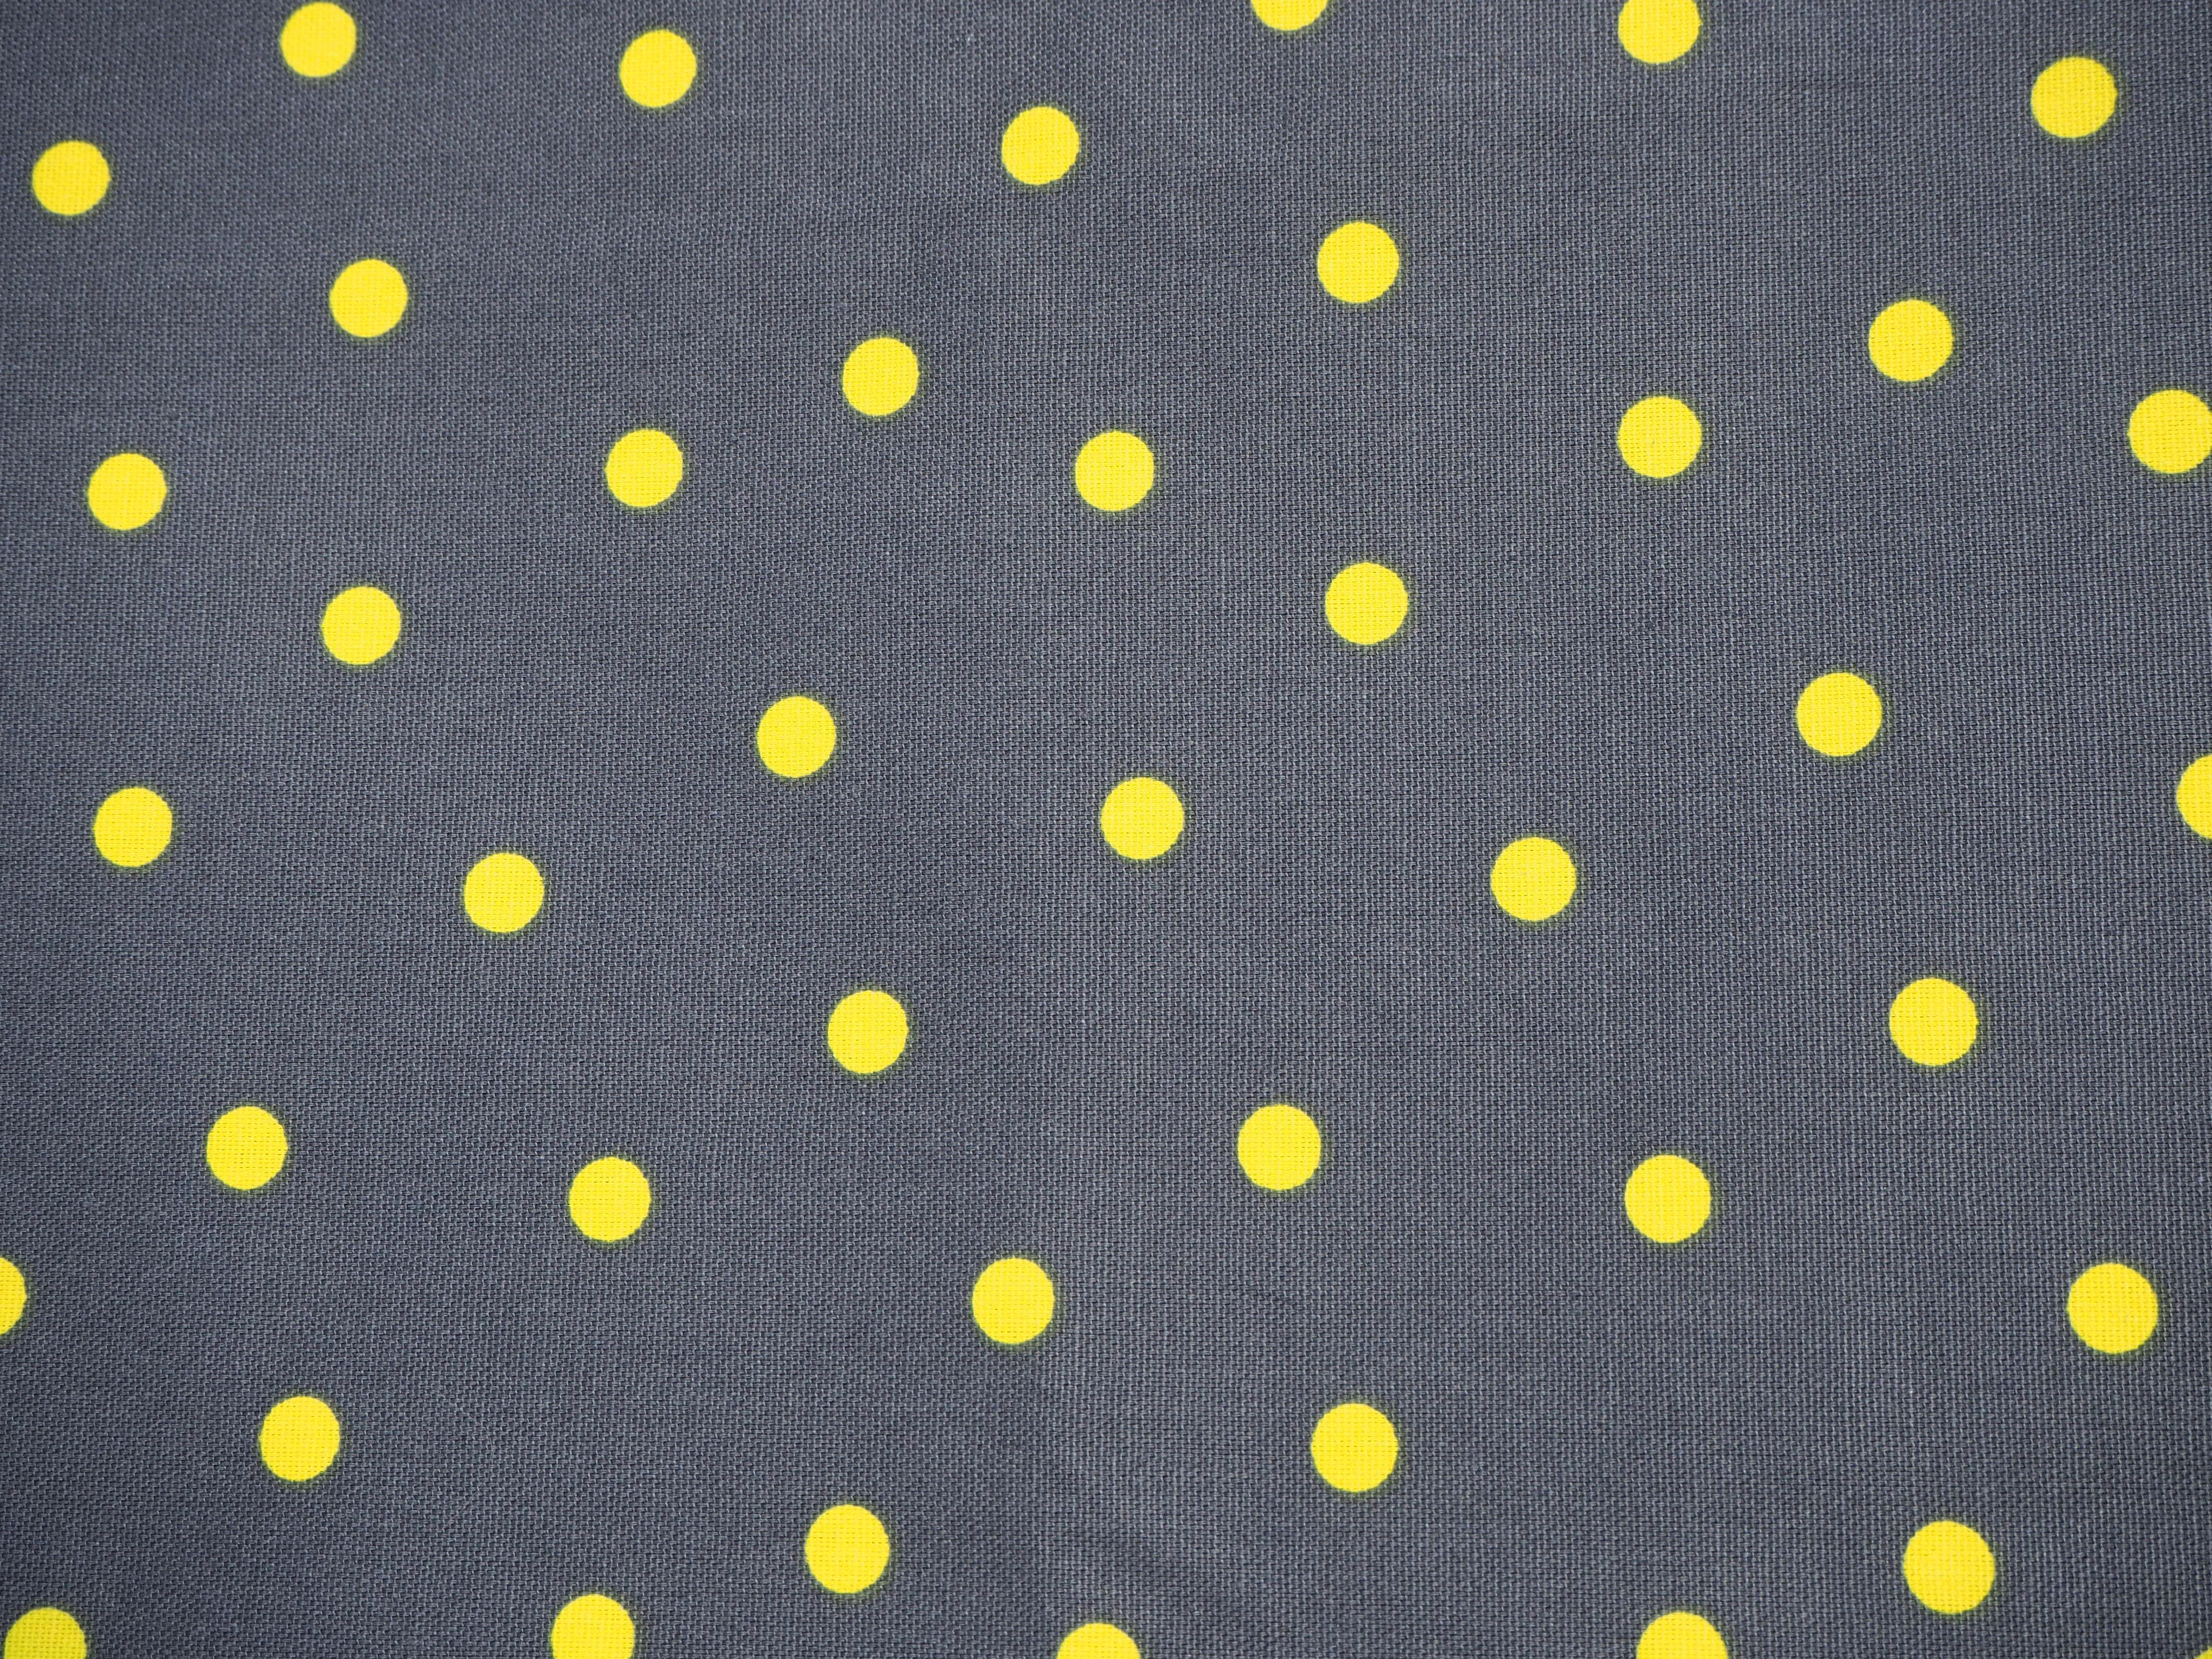 Fluro yellow spots on Charcoal Grey background print, 100% cotton fabric